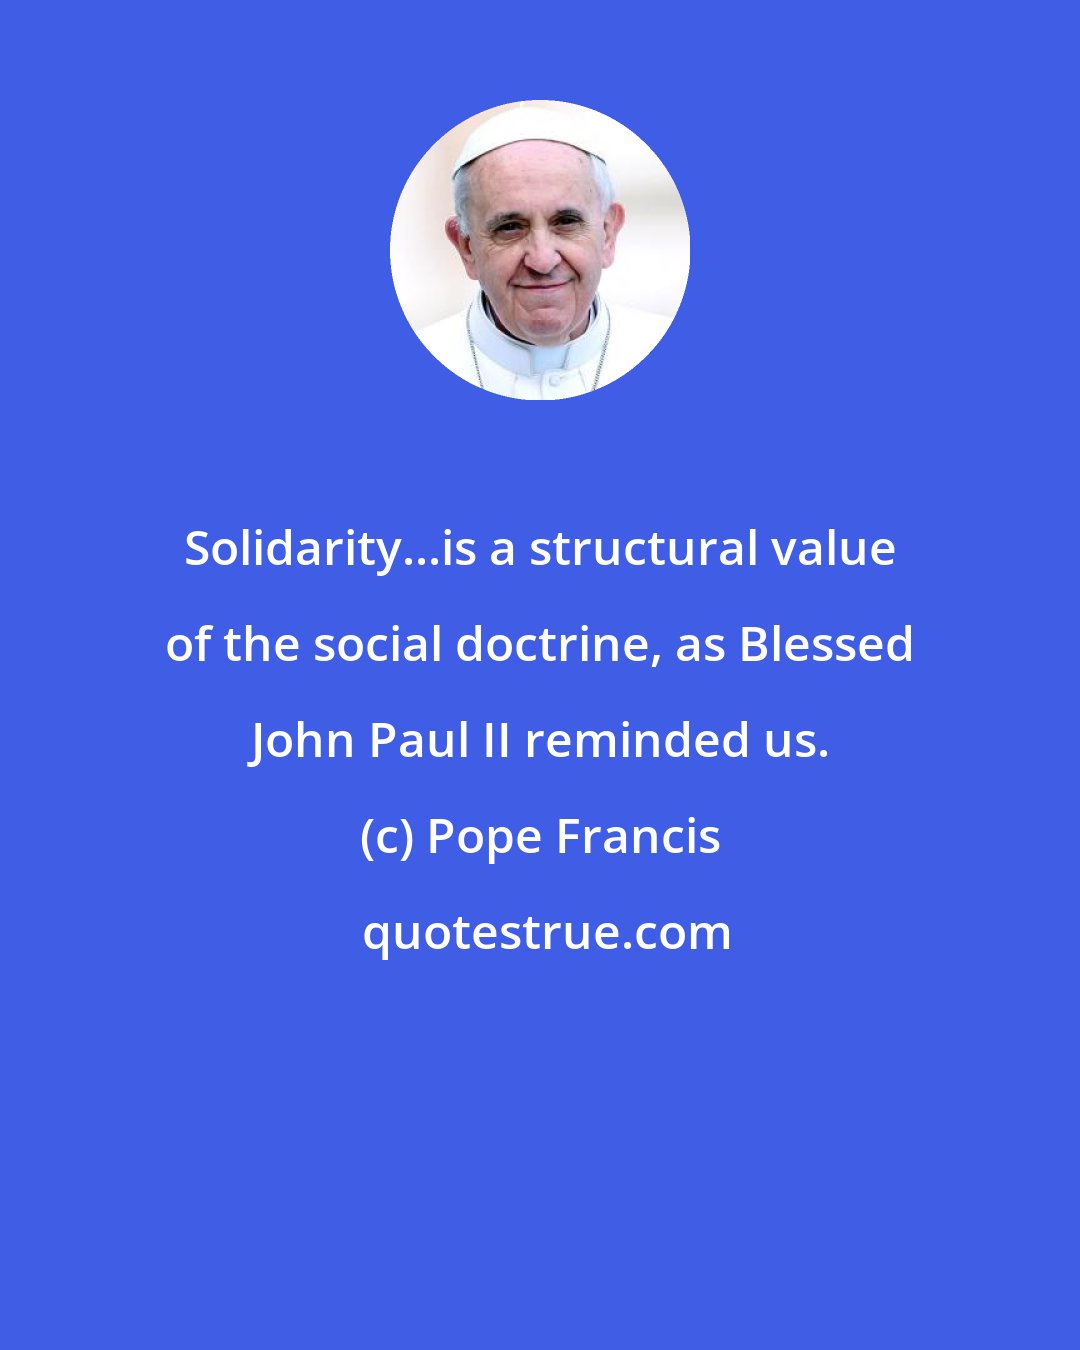 Pope Francis: Solidarity...is a structural value of the social doctrine, as Blessed John Paul II reminded us.